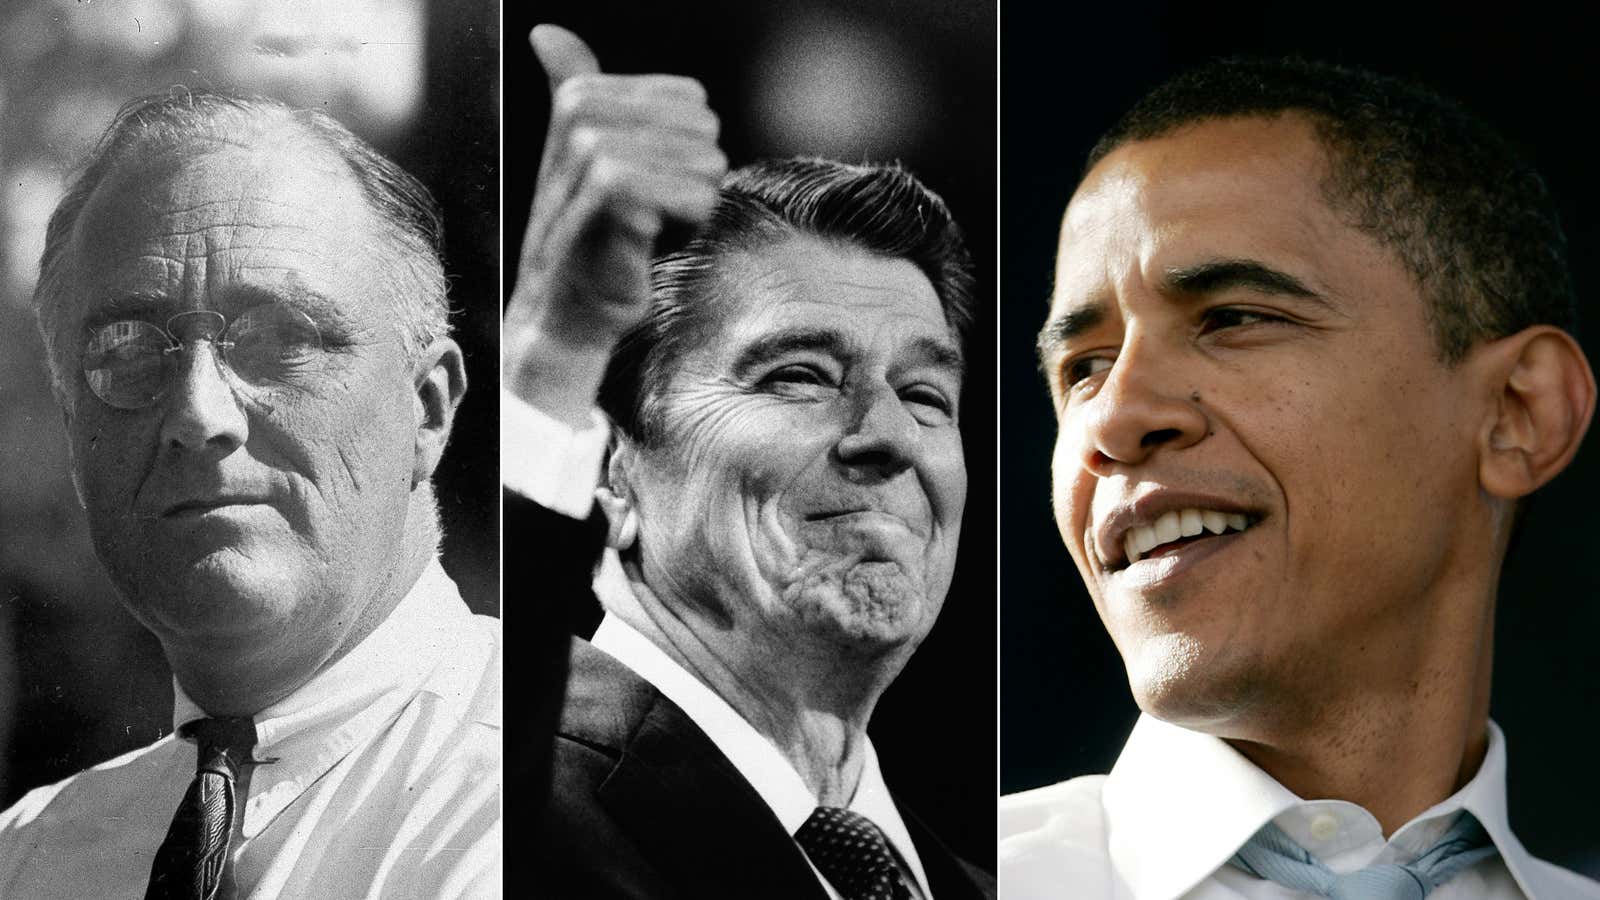 Obama could have an economic legacy as lasting as Reagan’s and Roosevelt’s, if only he can define it clearly.